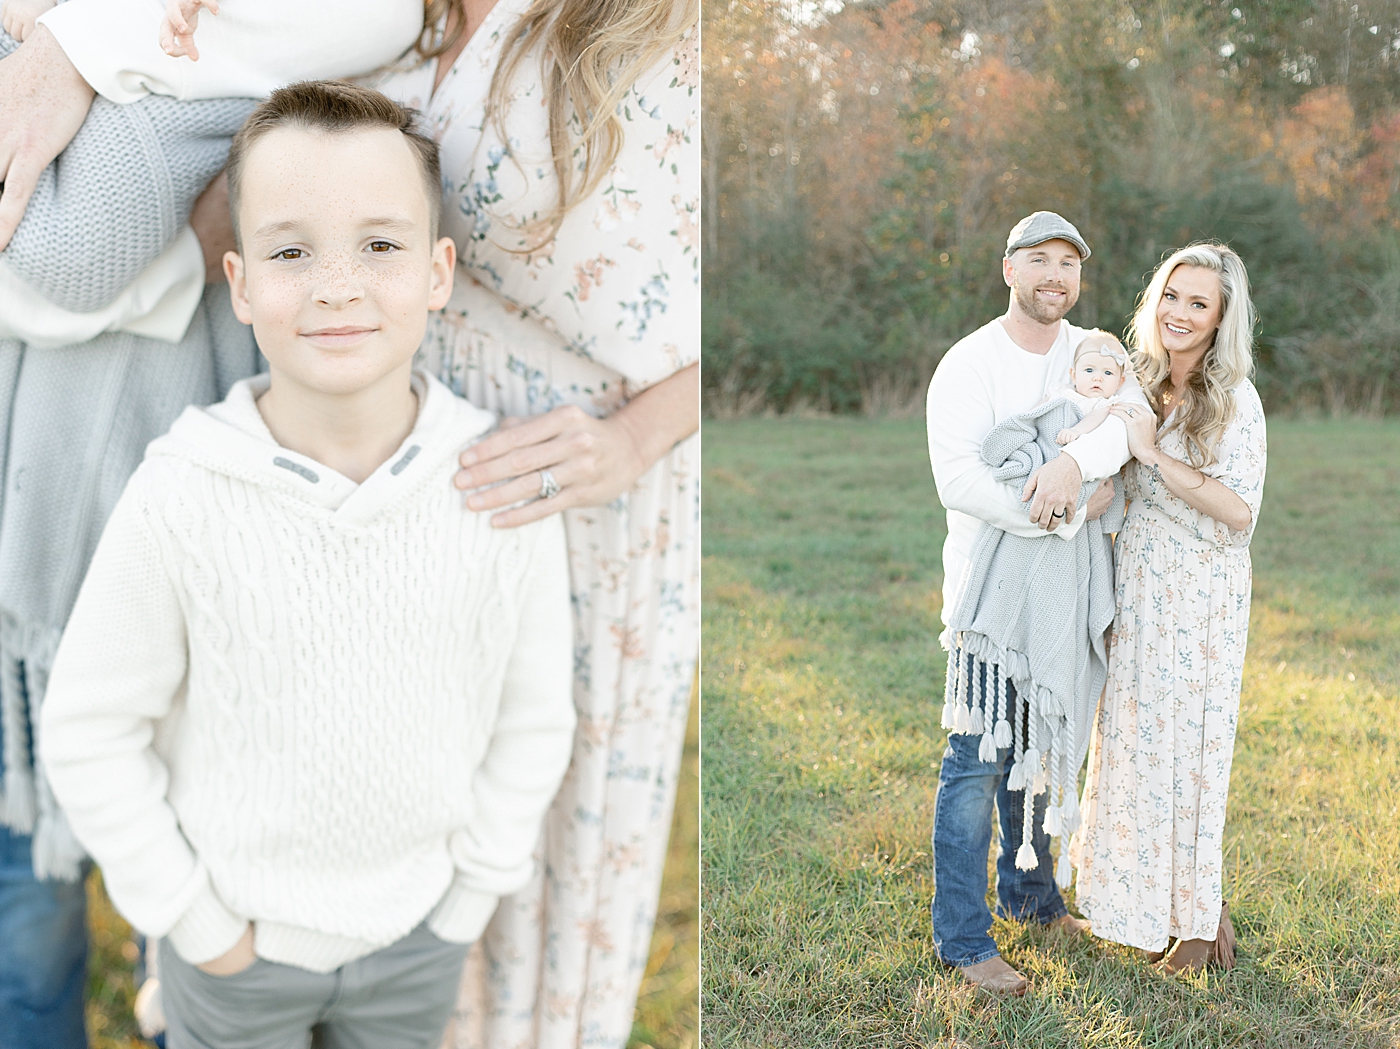 Detail of little boy with his family | Photo by Gulfport baby photographer Little Sunshine Photography